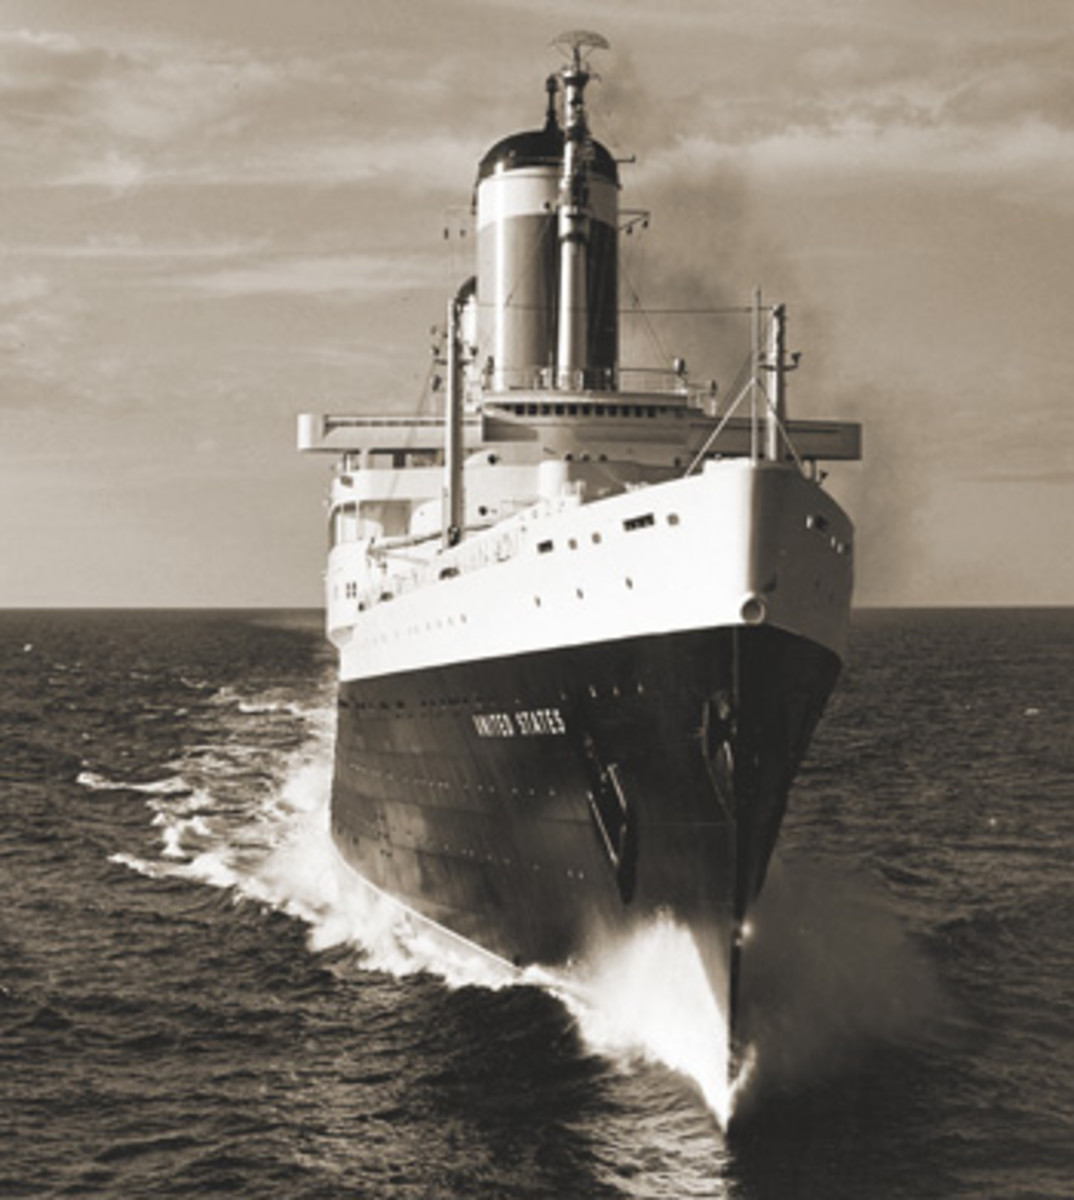 The SS United States in her heyday was a source of national pride and a glamorous host to countless celebrities and dignitaries.